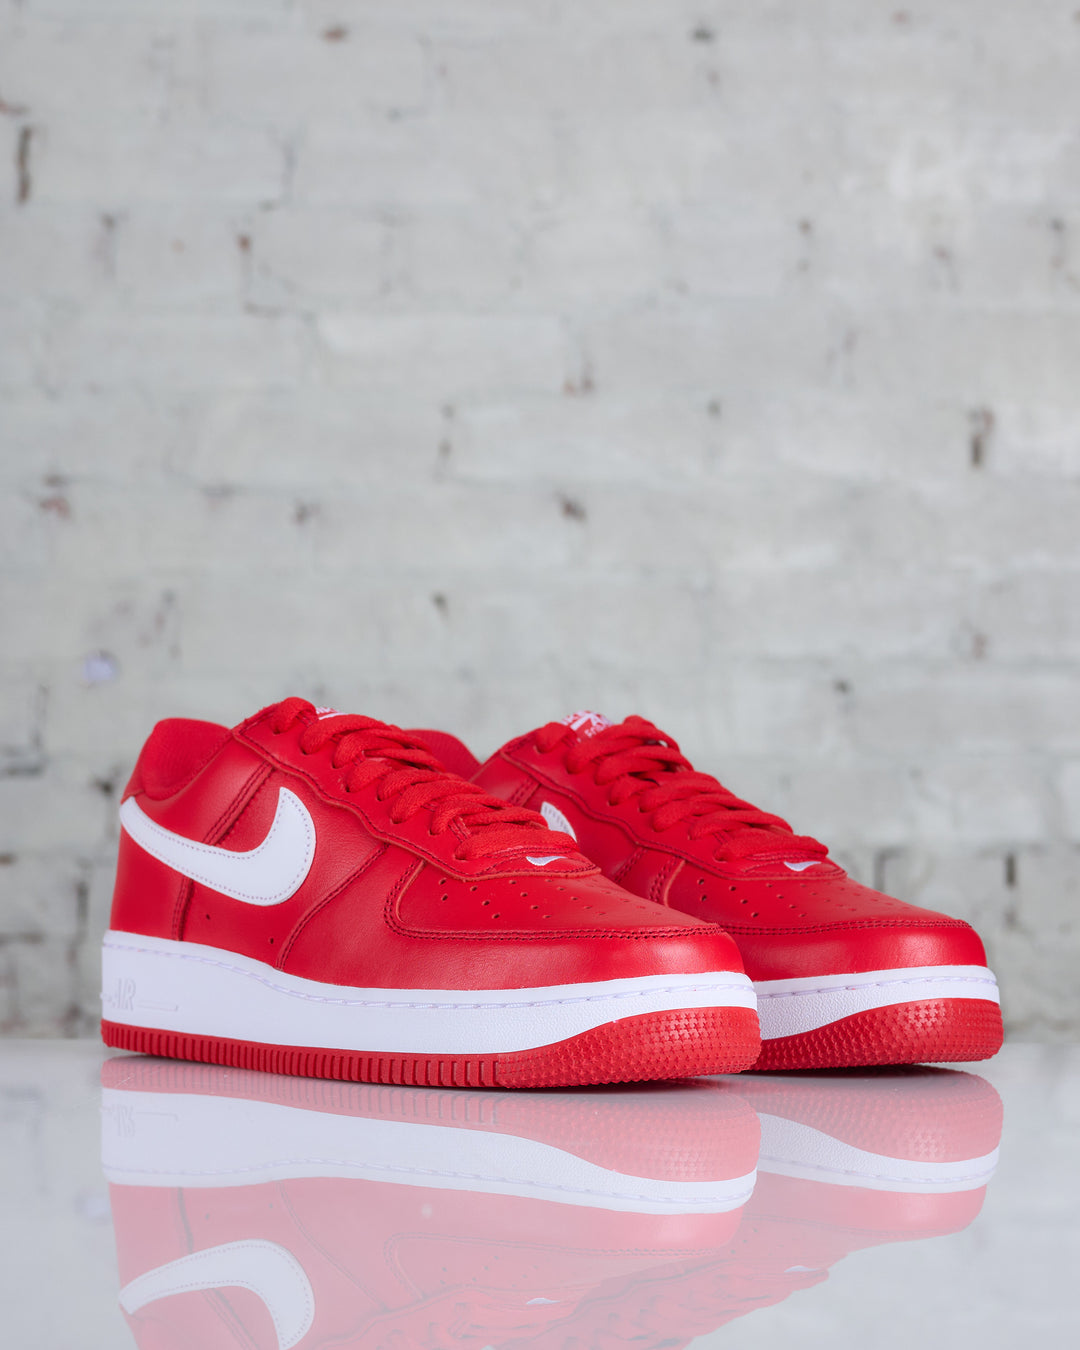 Nike Air Force 1 AC - University Red - White 